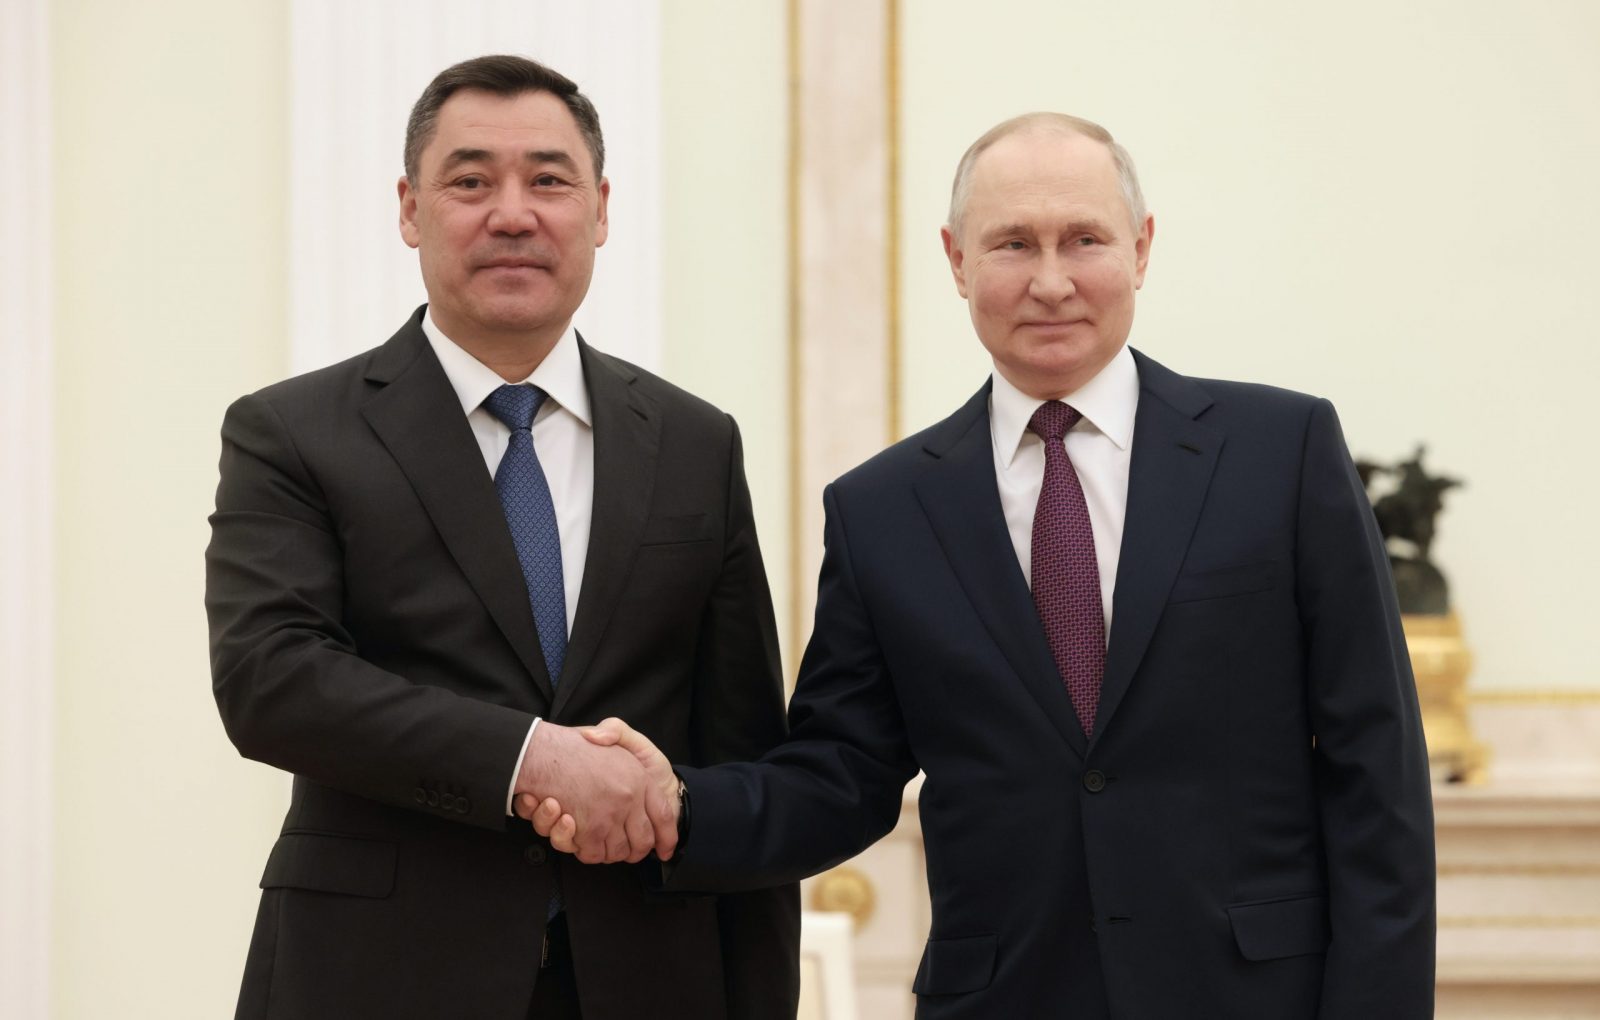 epa10615338 Russian President Vladimir Putin (R) shakes hands with Kyrgyz President Sadyr Japarov during their meeting at the Moscow Kremlin in Moscow, Russia 08 May 2023. The leaders of the countries of the former USSR - Kazakhstan, Kyrgyzstan, Armenia and Tajikistan will take part in the events on 09 May dedicated to Victory Day in Moscow.  EPA/SPUTNIK/ KREMLIN POOL MANDATORY CREDIT